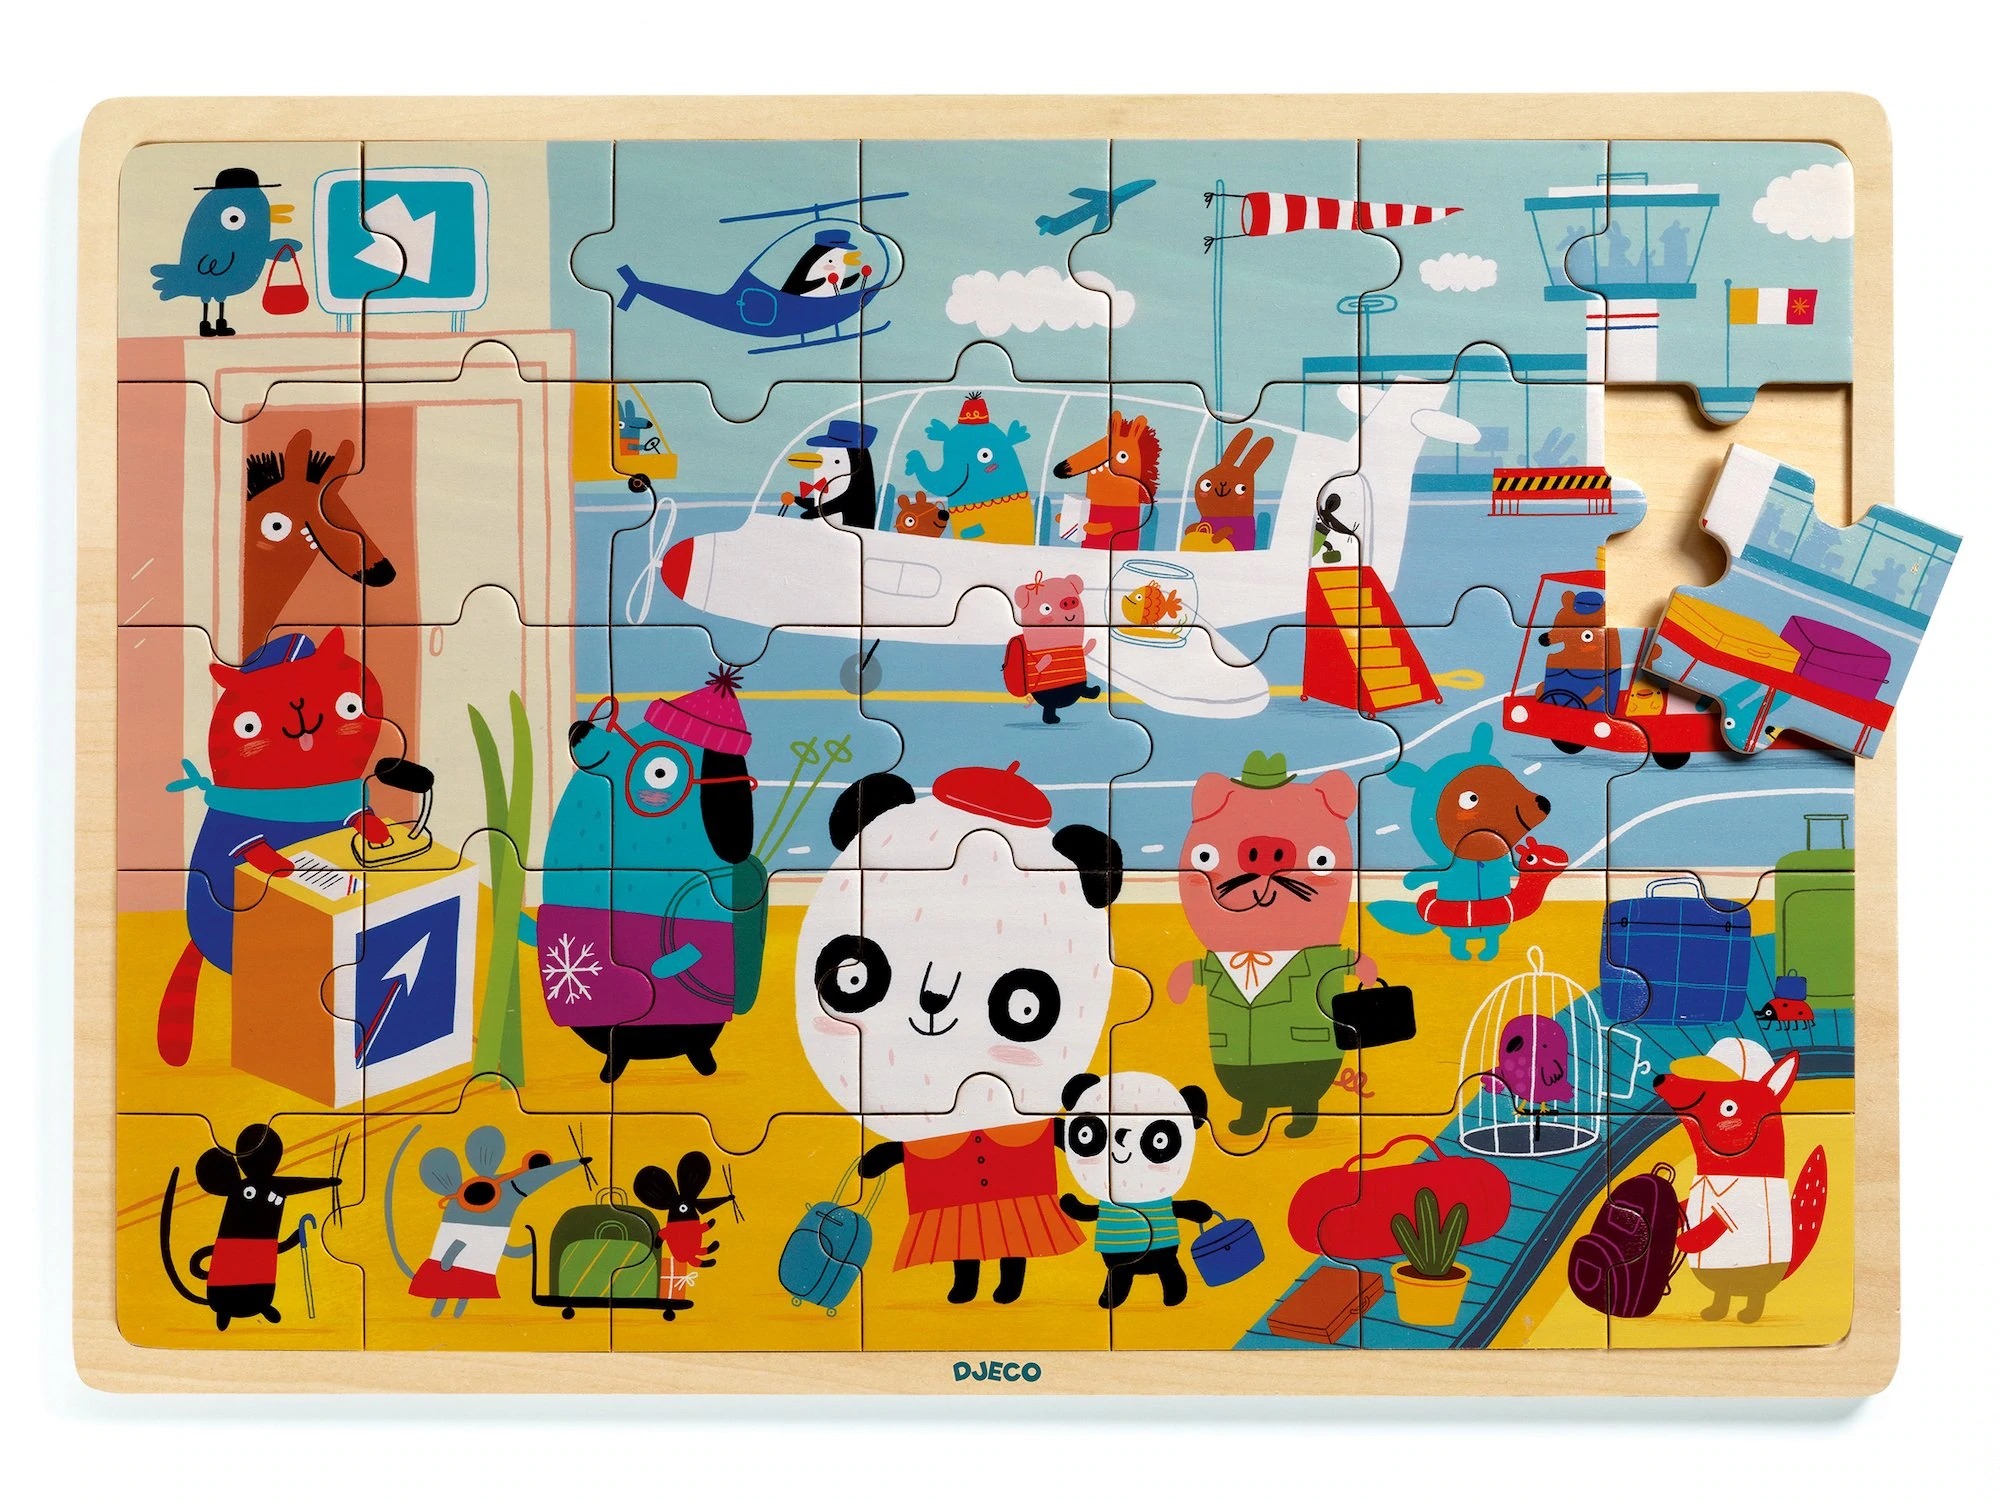 Djeco Puzzlo Airport 35pc Wooden Jigsaw Puzzle